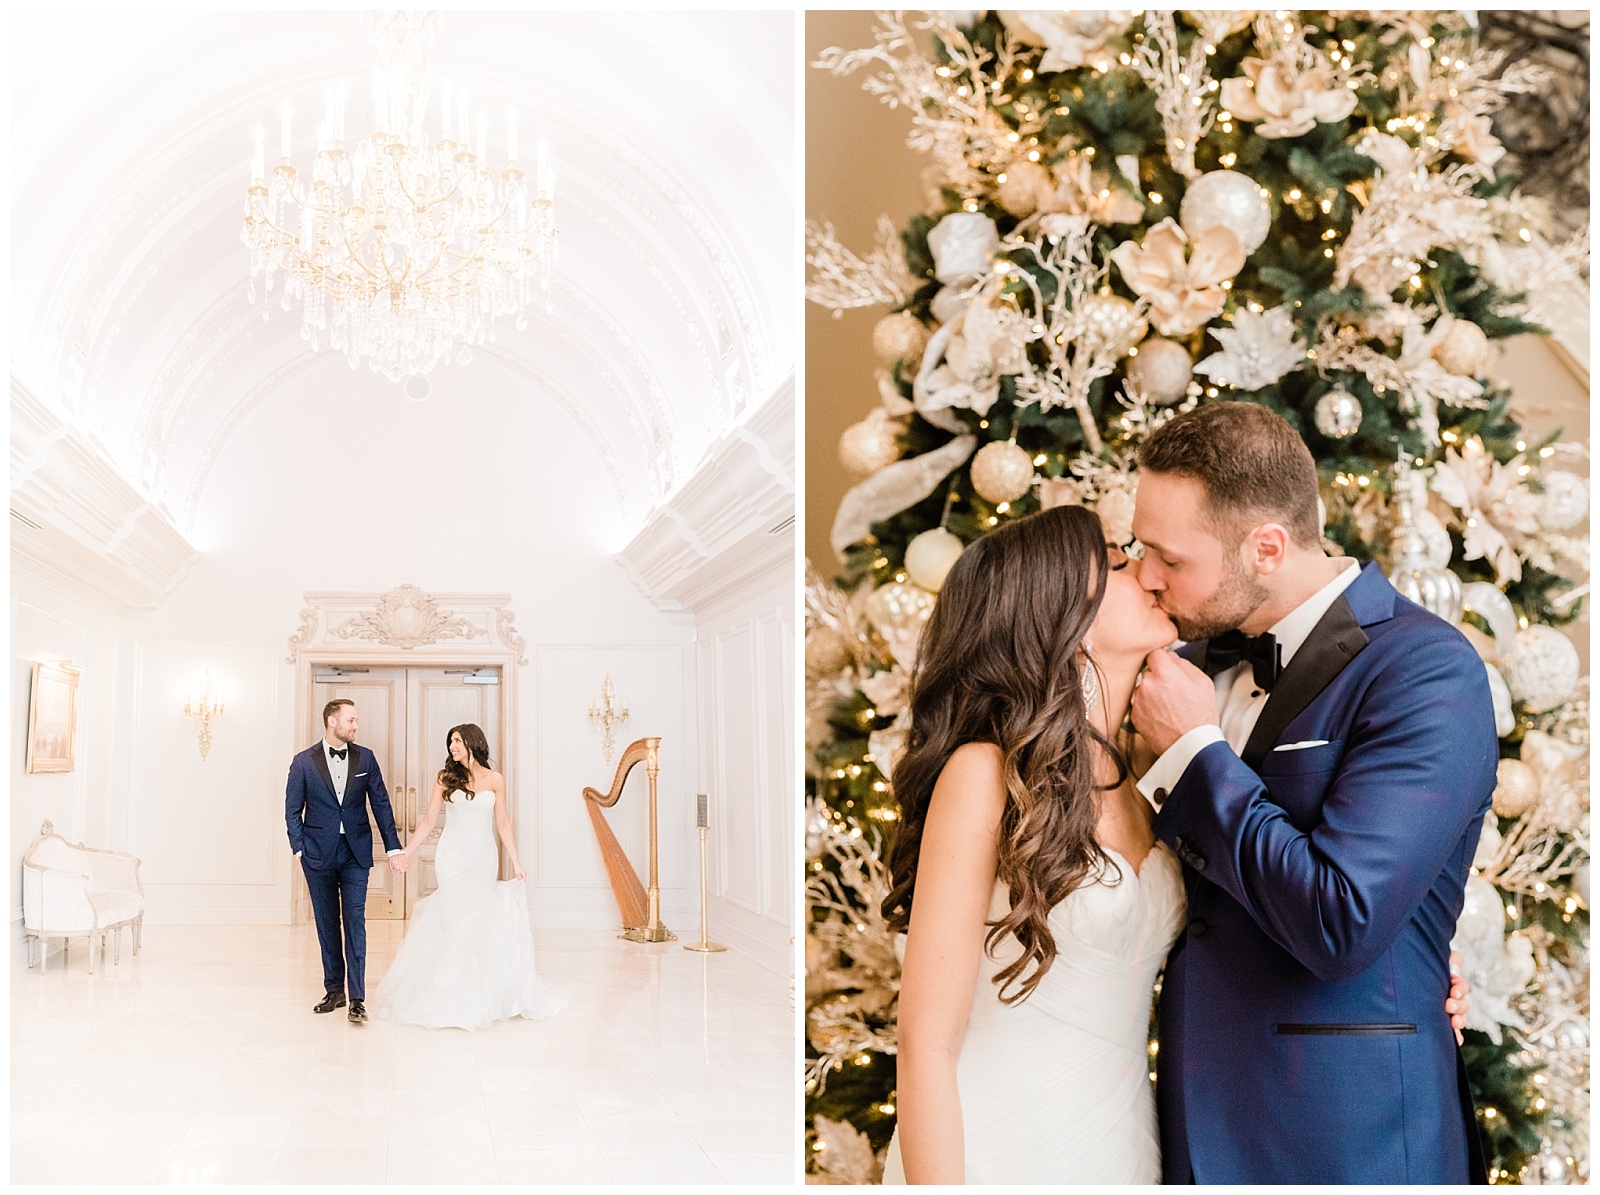 Park Chateau Wedding, Photographer, New Jersey, NJ, Winter, Bride and Groom Portraits, Light and Airy, Ornaments, Christmas Tree